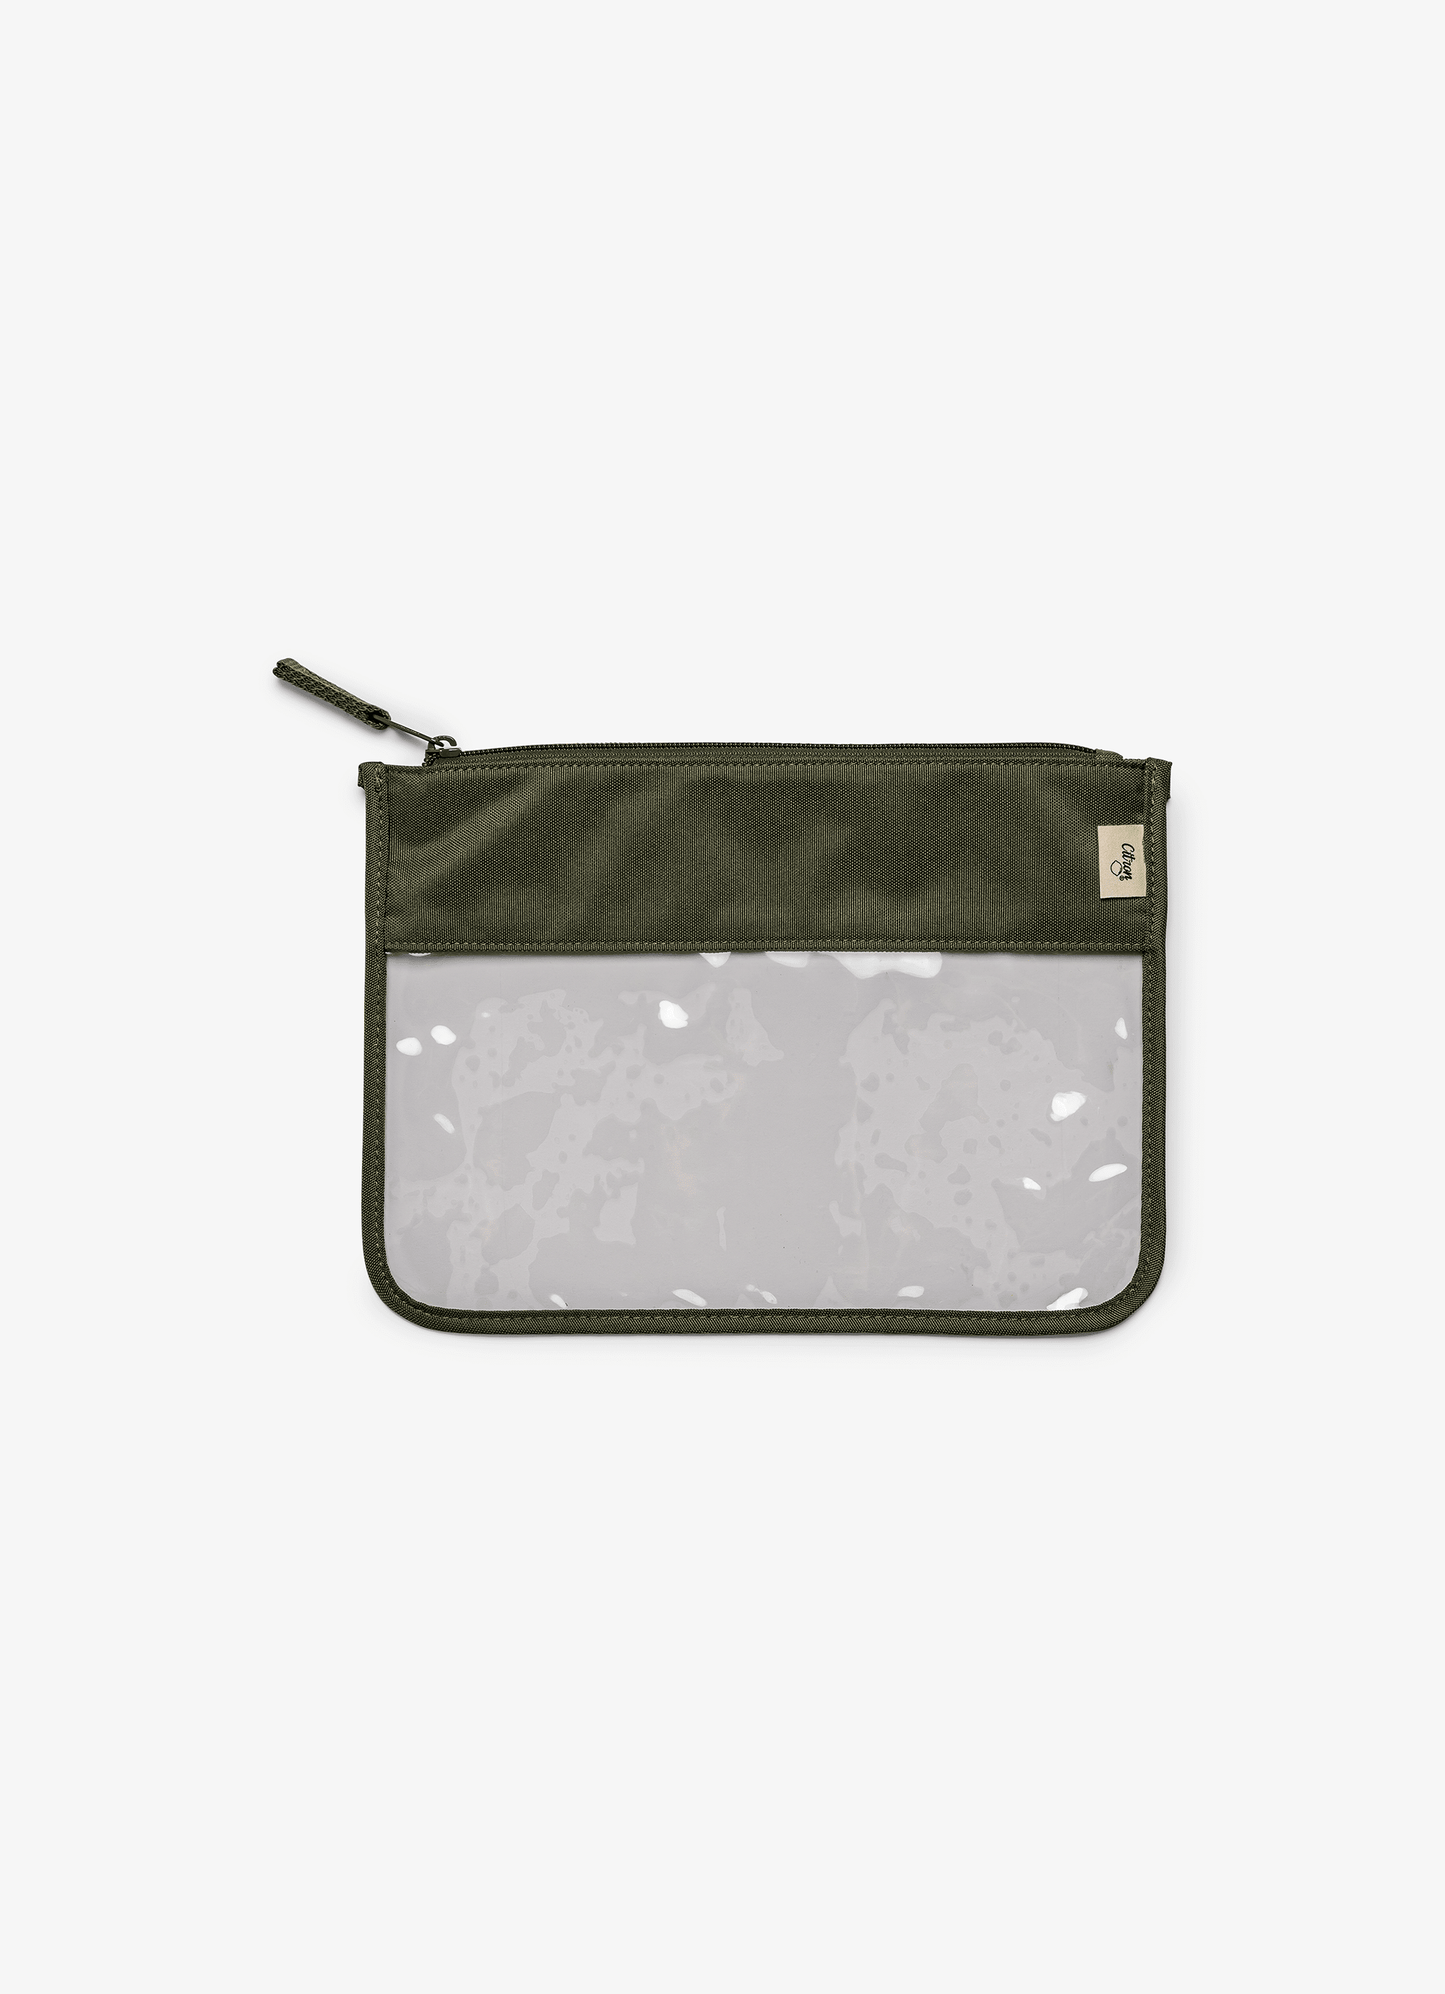 Clear Zipper Pouch - Large - Green